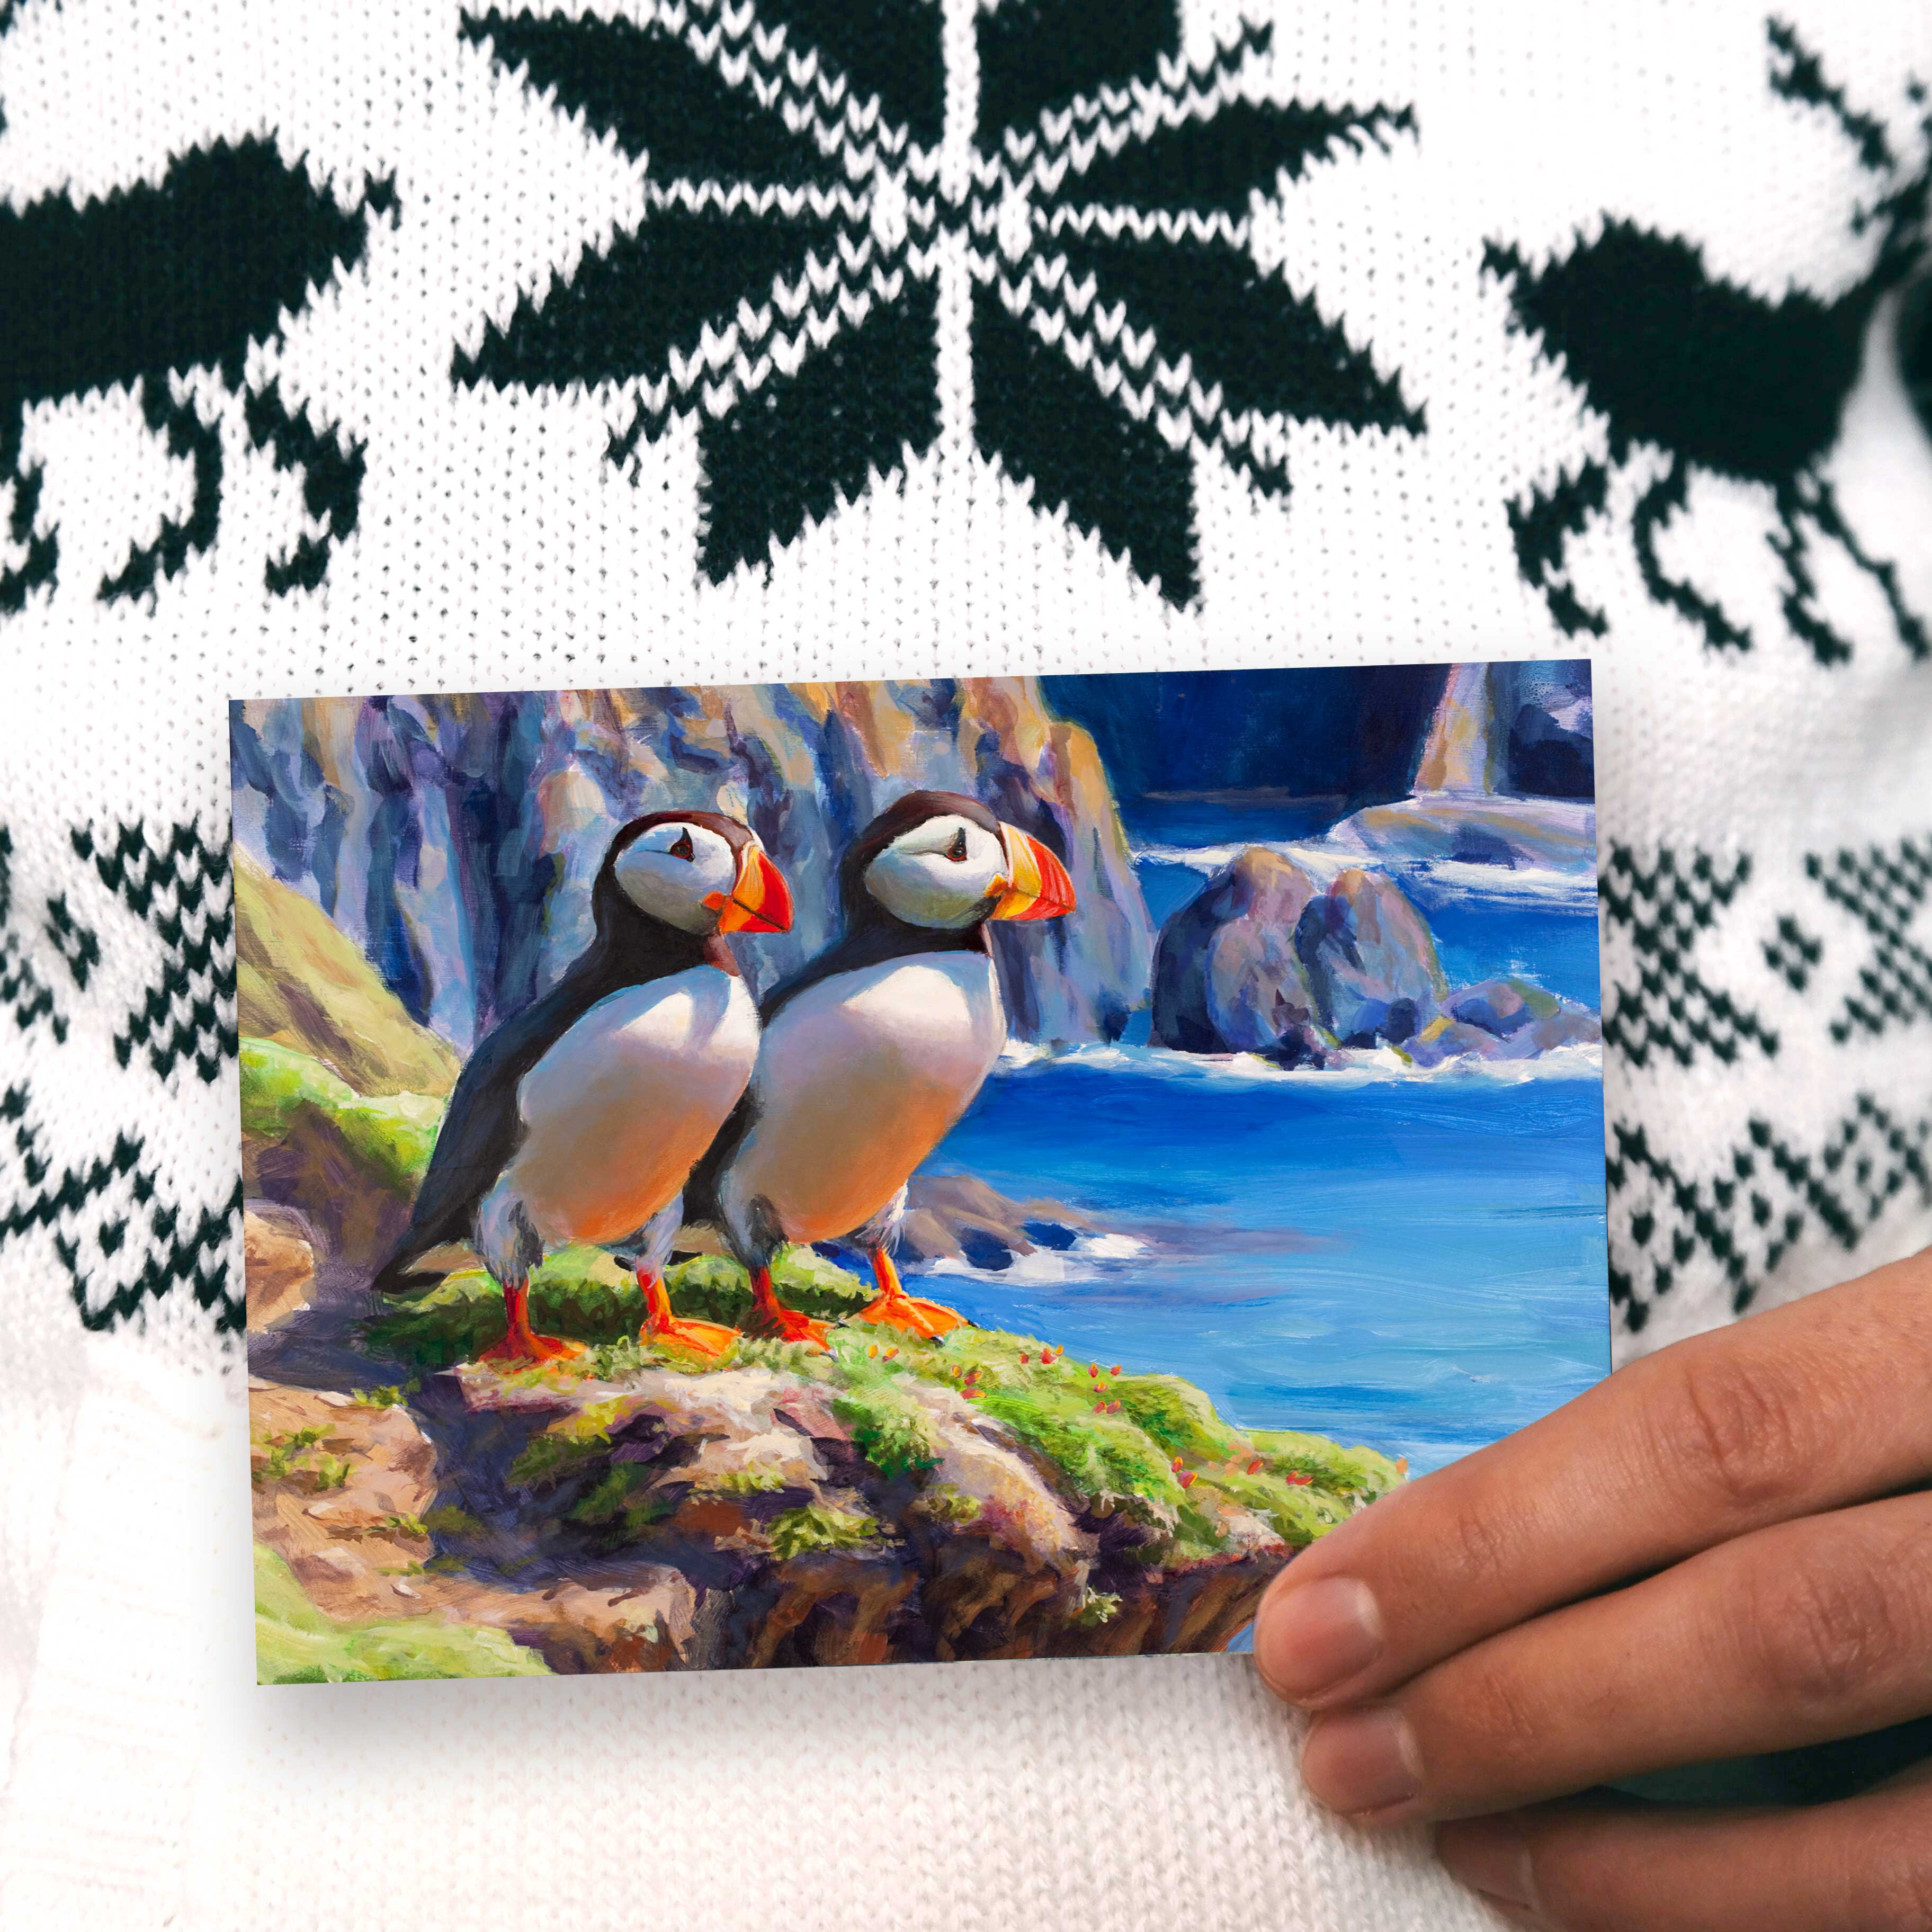 Puffins on the costal shores greeting card by Alaska artist Karen Whitworth